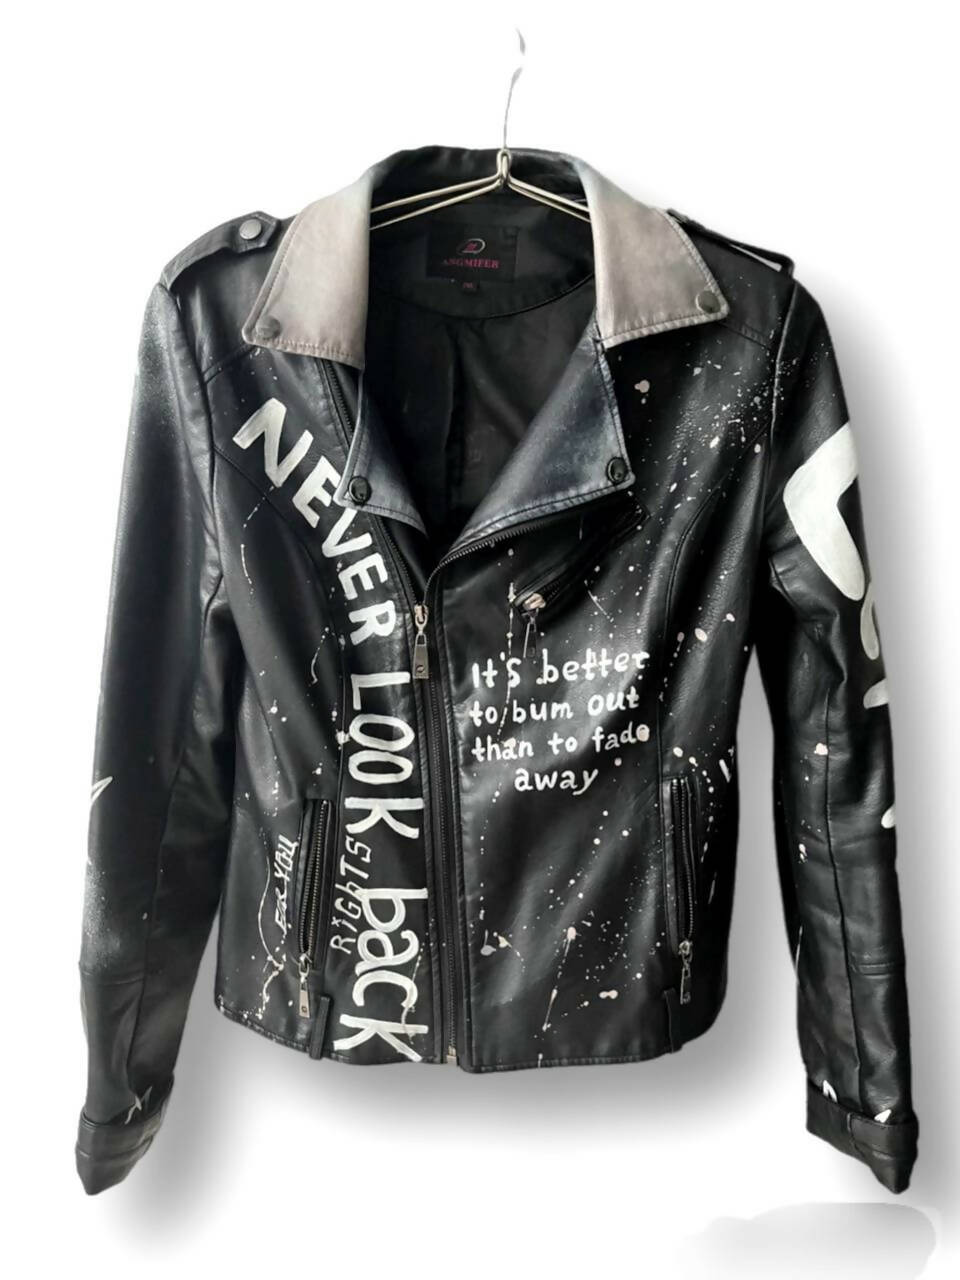 'Dare to Defy' Leather Jacket